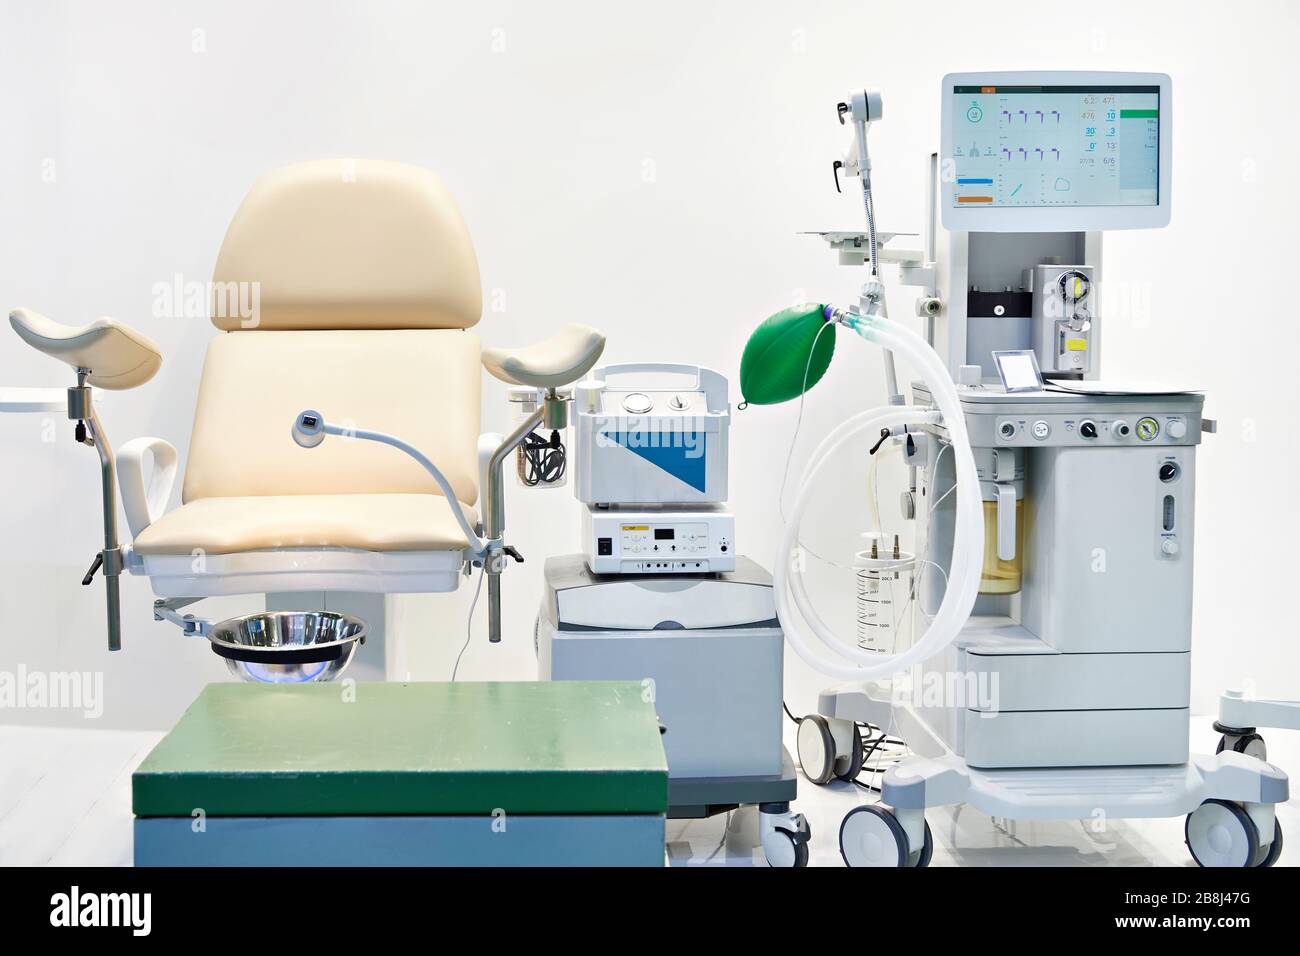 Medical equipment for gynecological examination Stock Photo